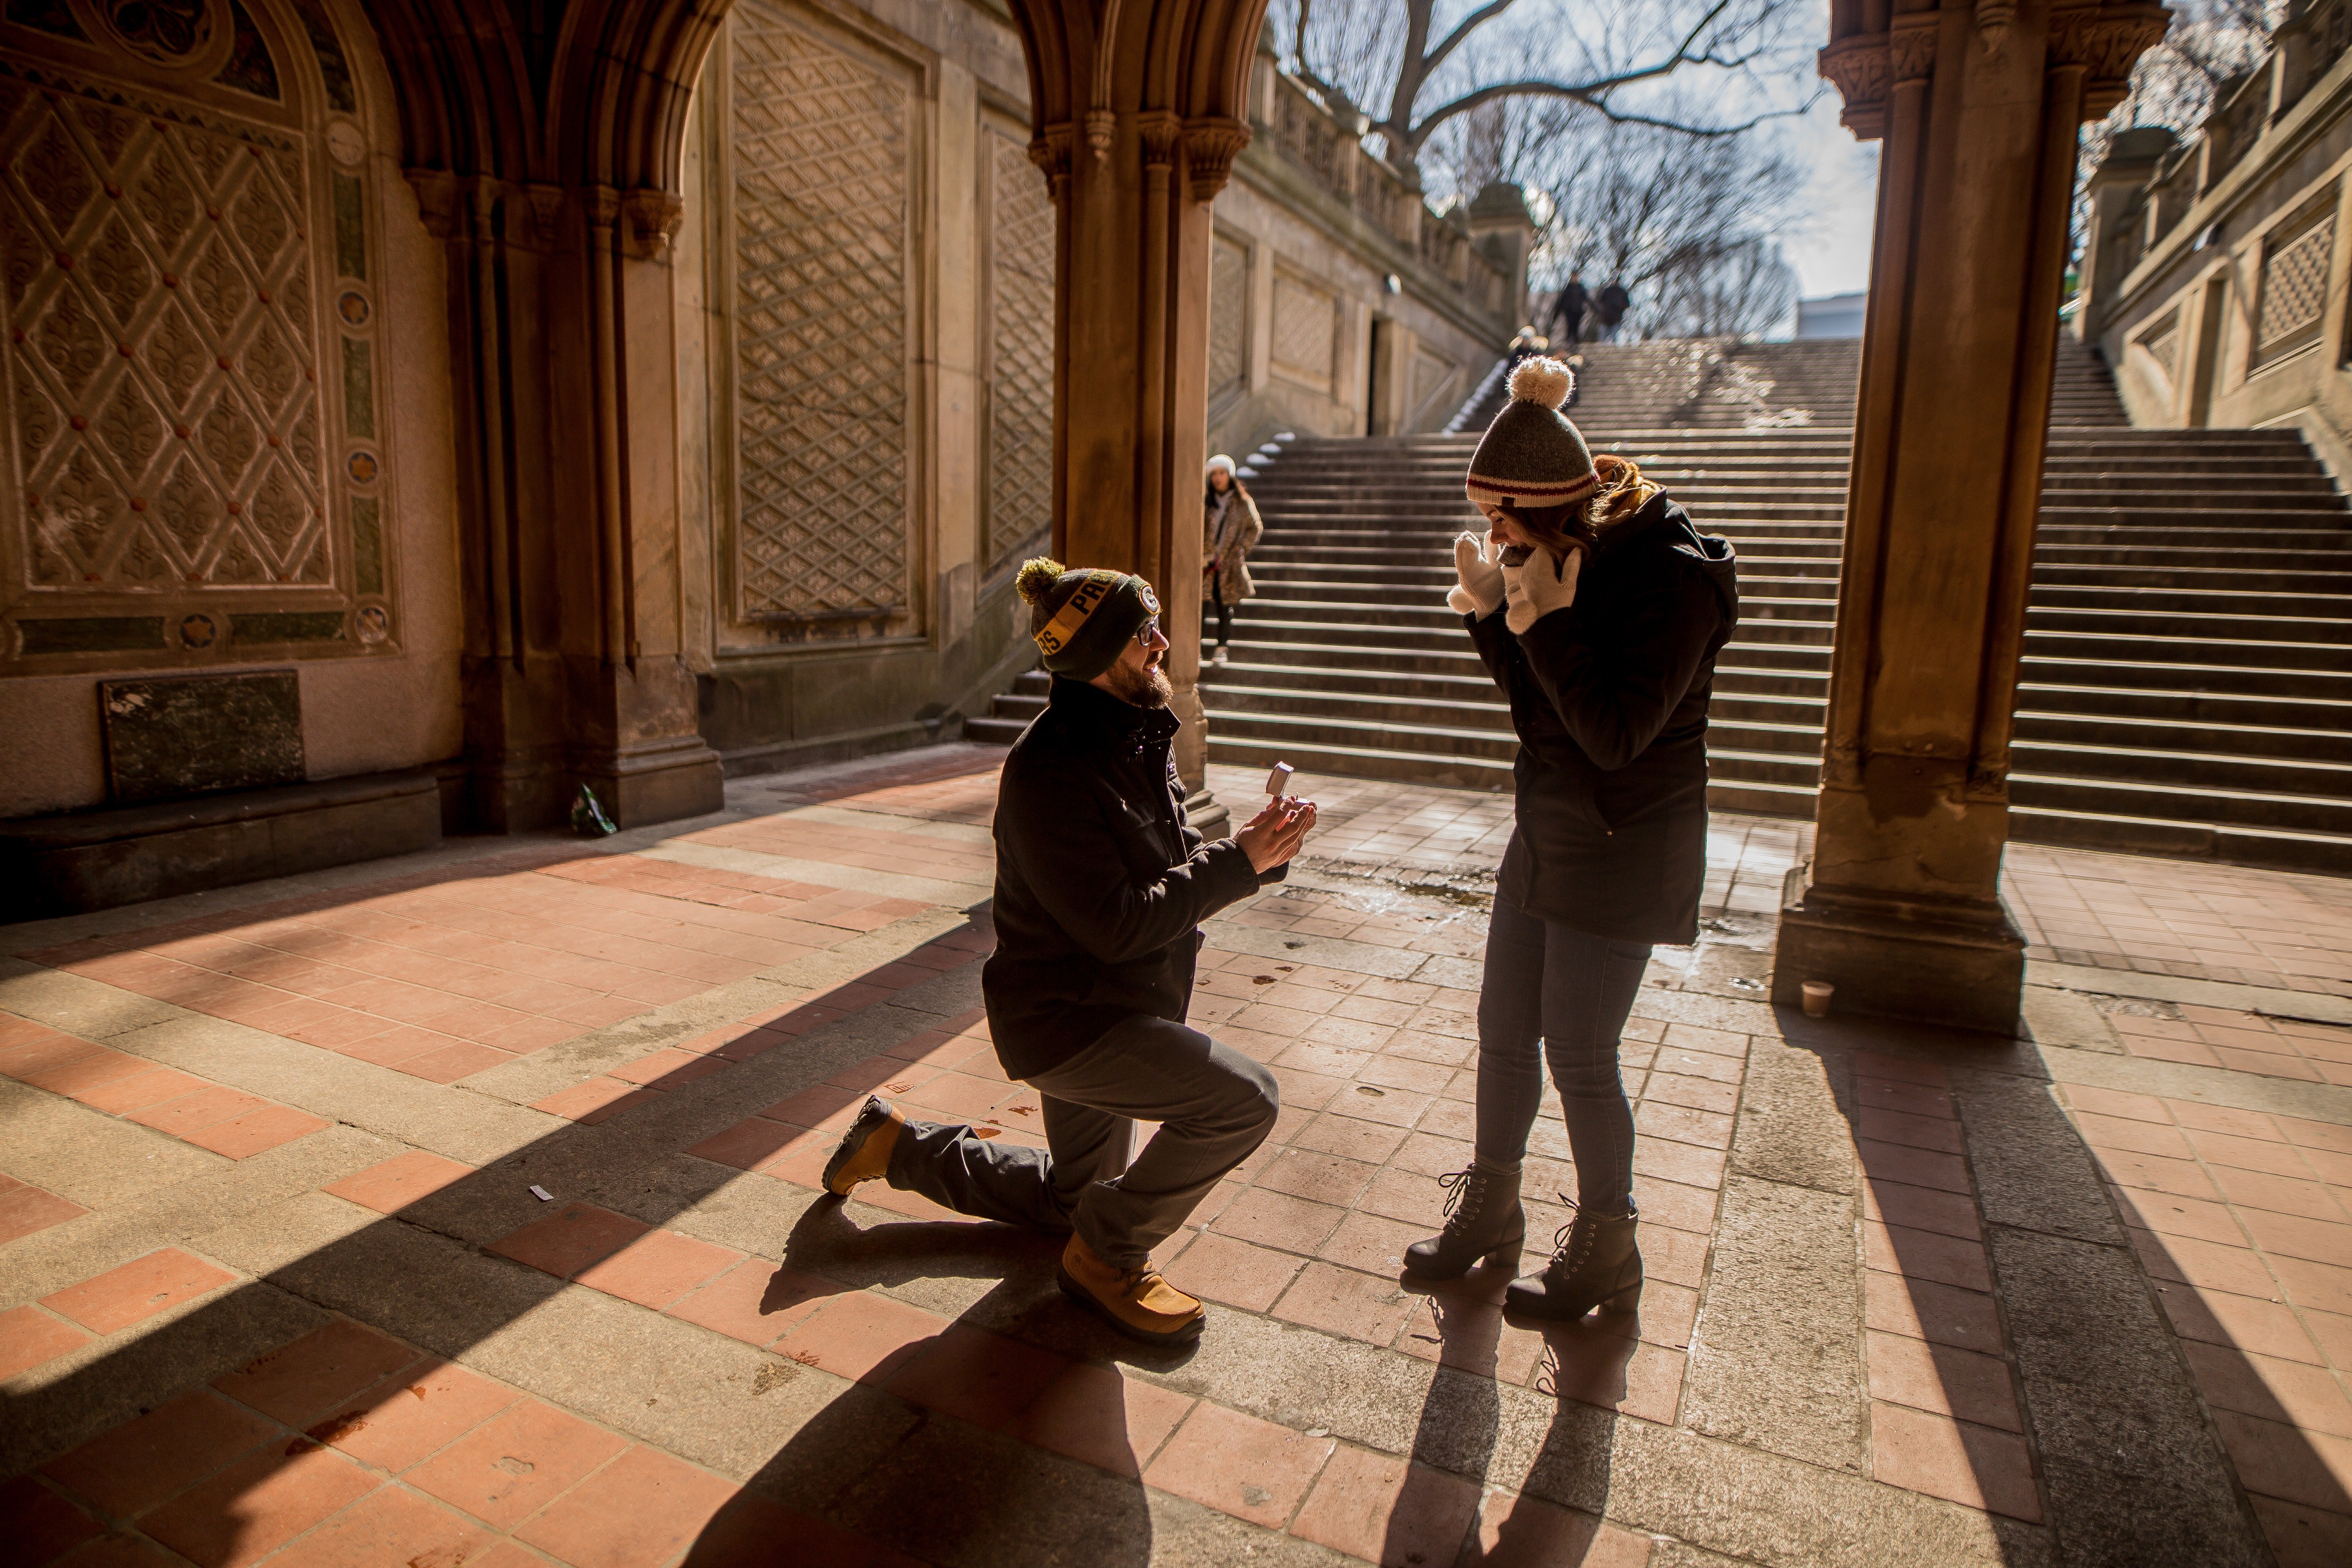 A man on his knee making a marriage proposal to a woman | Source: Pexels